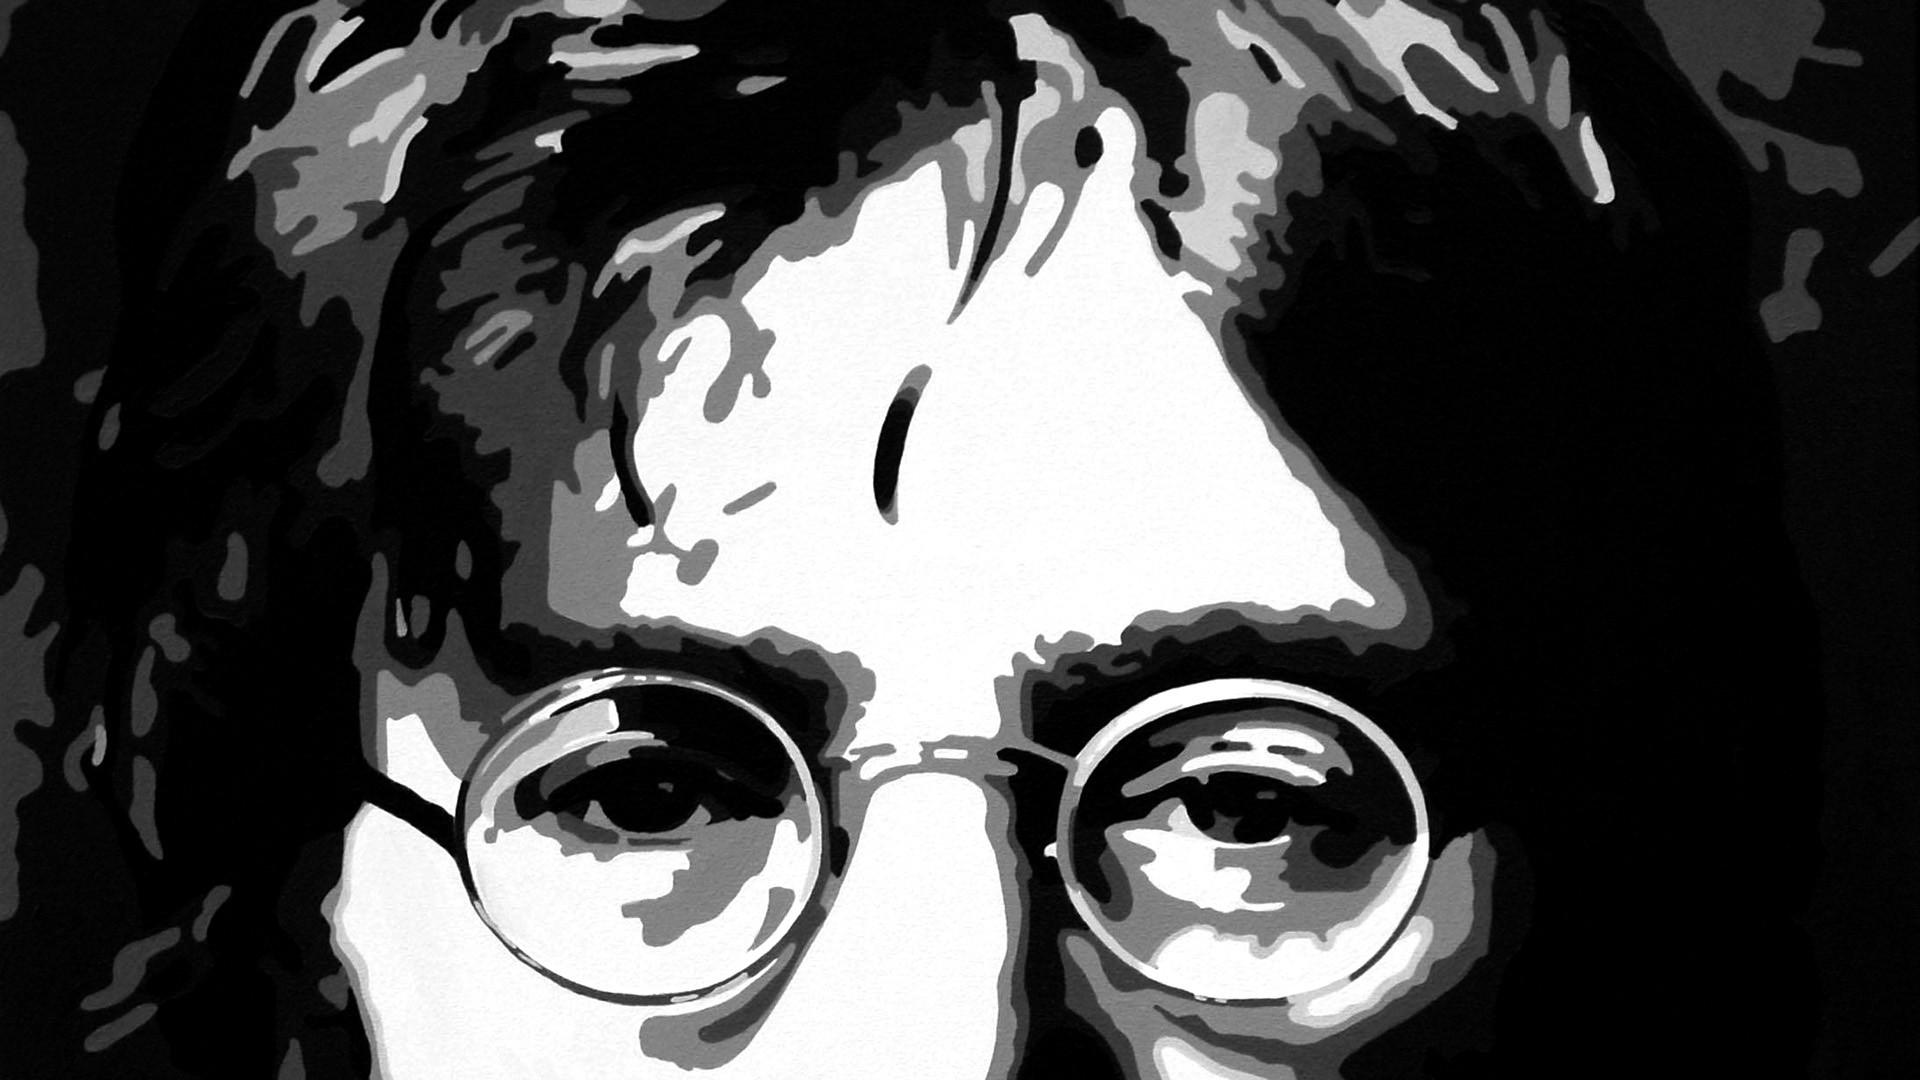 Beatles john lennon vector abstract groups bands glasses classic face eyes people wallpaper 27142 WallpaperUP